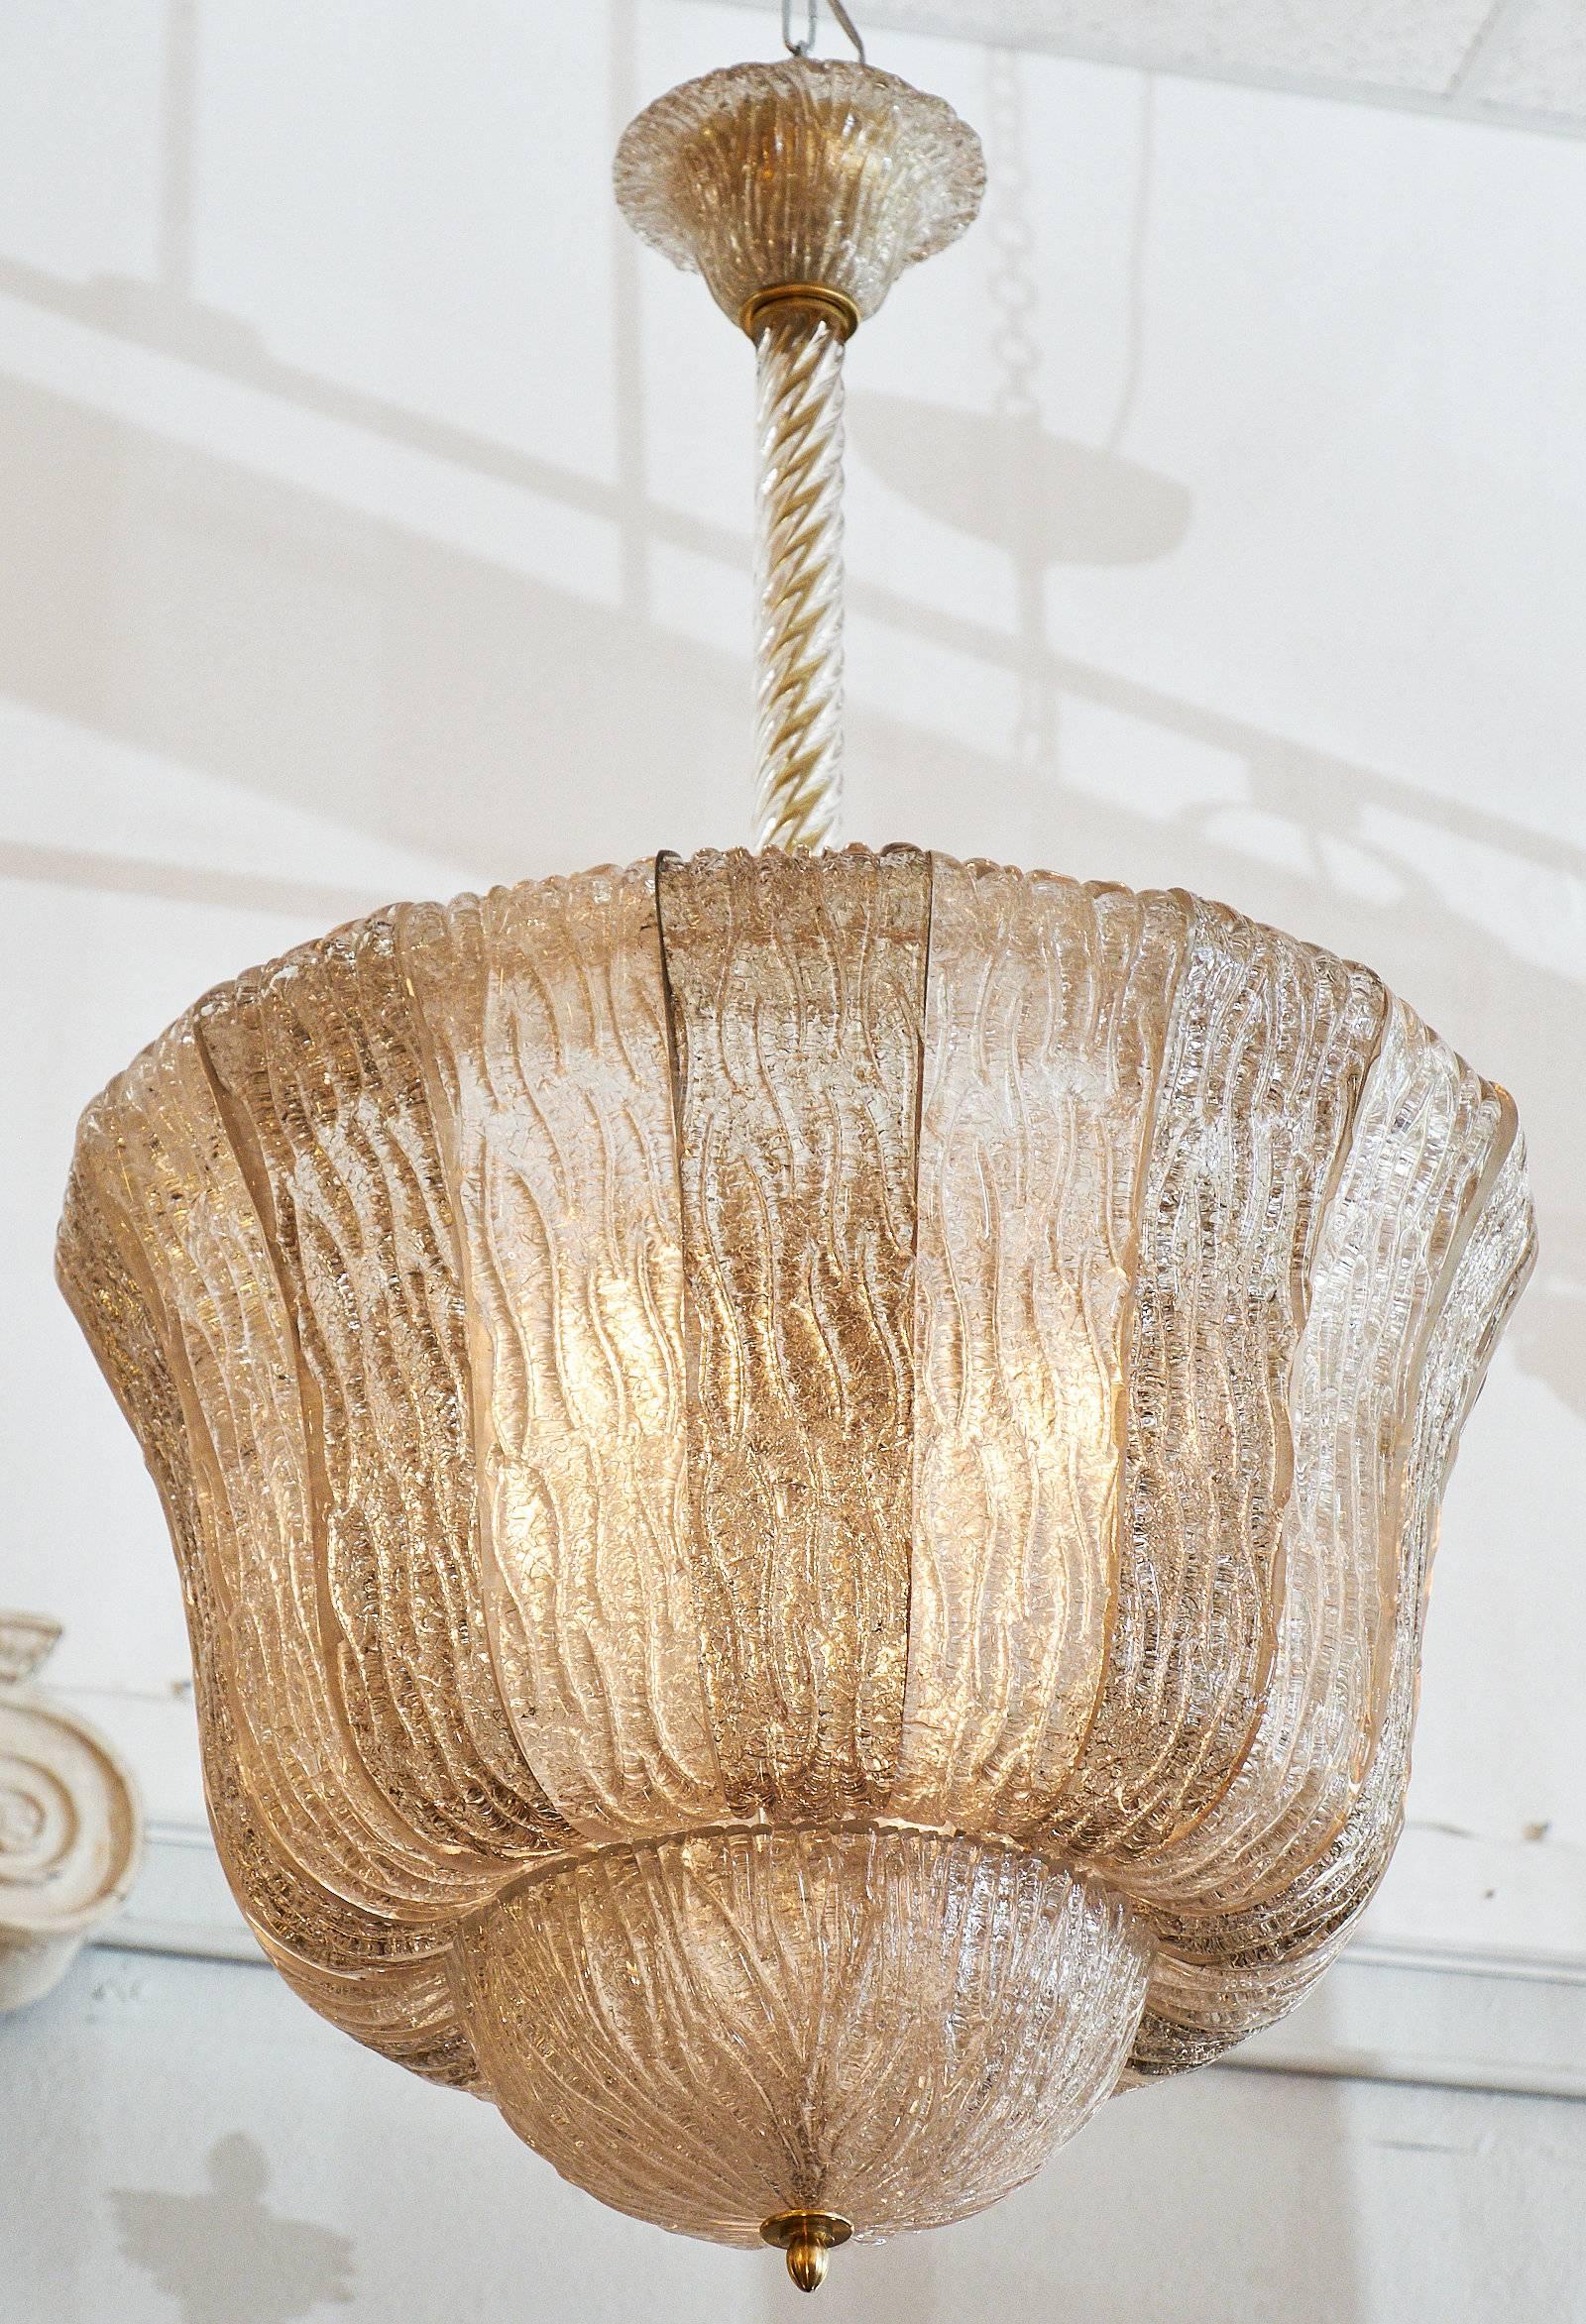 A superb two-tone lantern of stamped Murano glass. The glass alternates between a clear and smoke tone. The beautiful bell shape of the fixtures hangs from a brass rod concealed inside a torsado glass tube. This Barovier piece has been rewired for